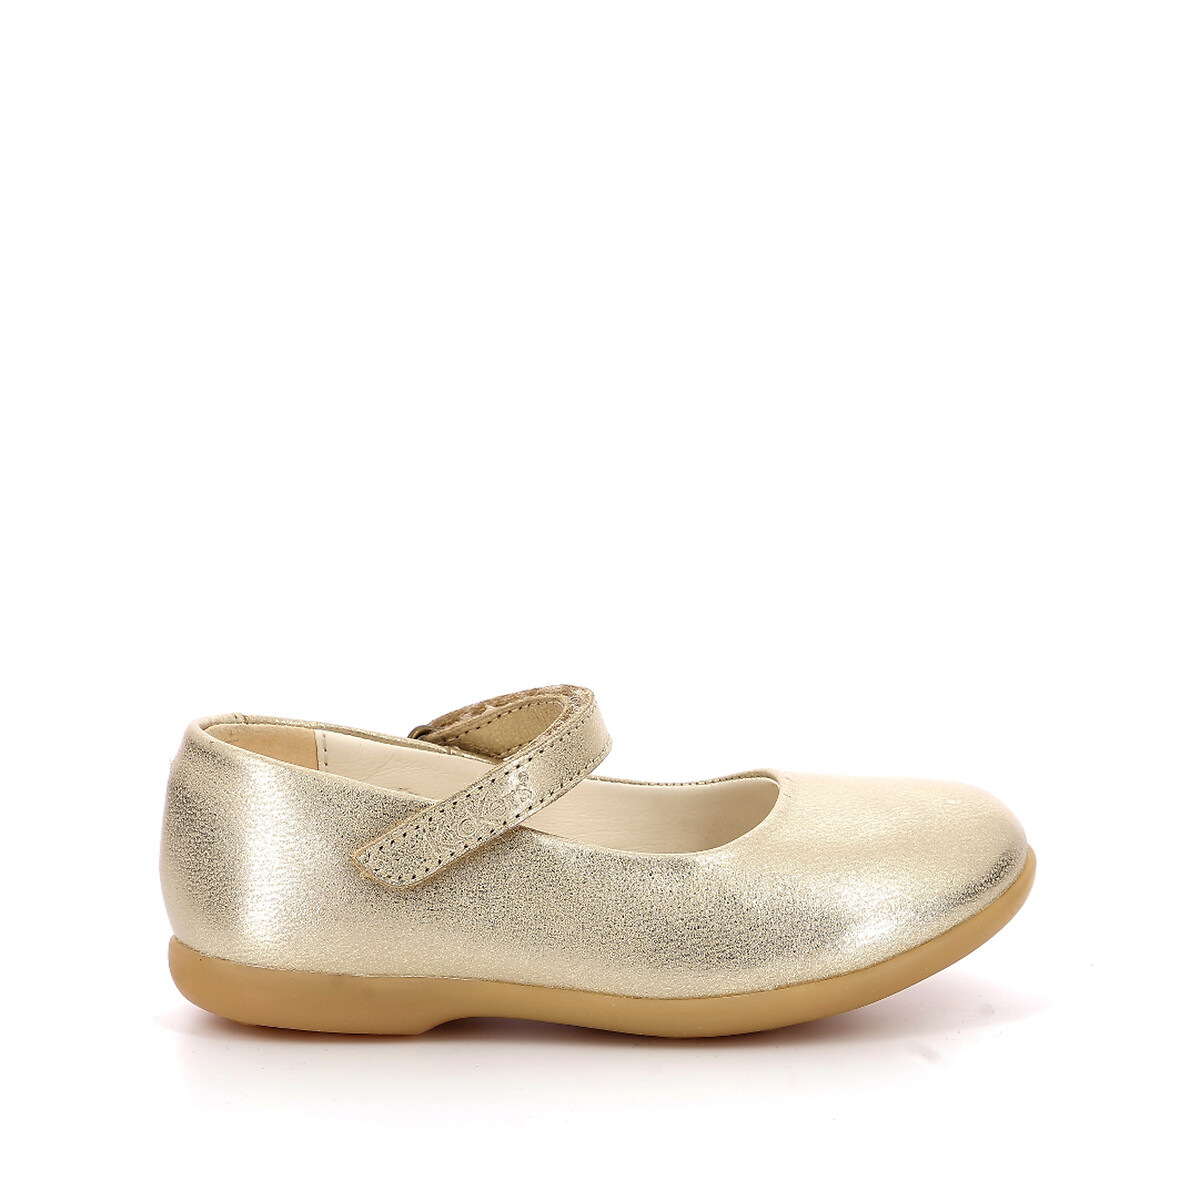 Image of Kids Ambellie Ballet Pumps in Leather with Touch 'n' Close Fastening